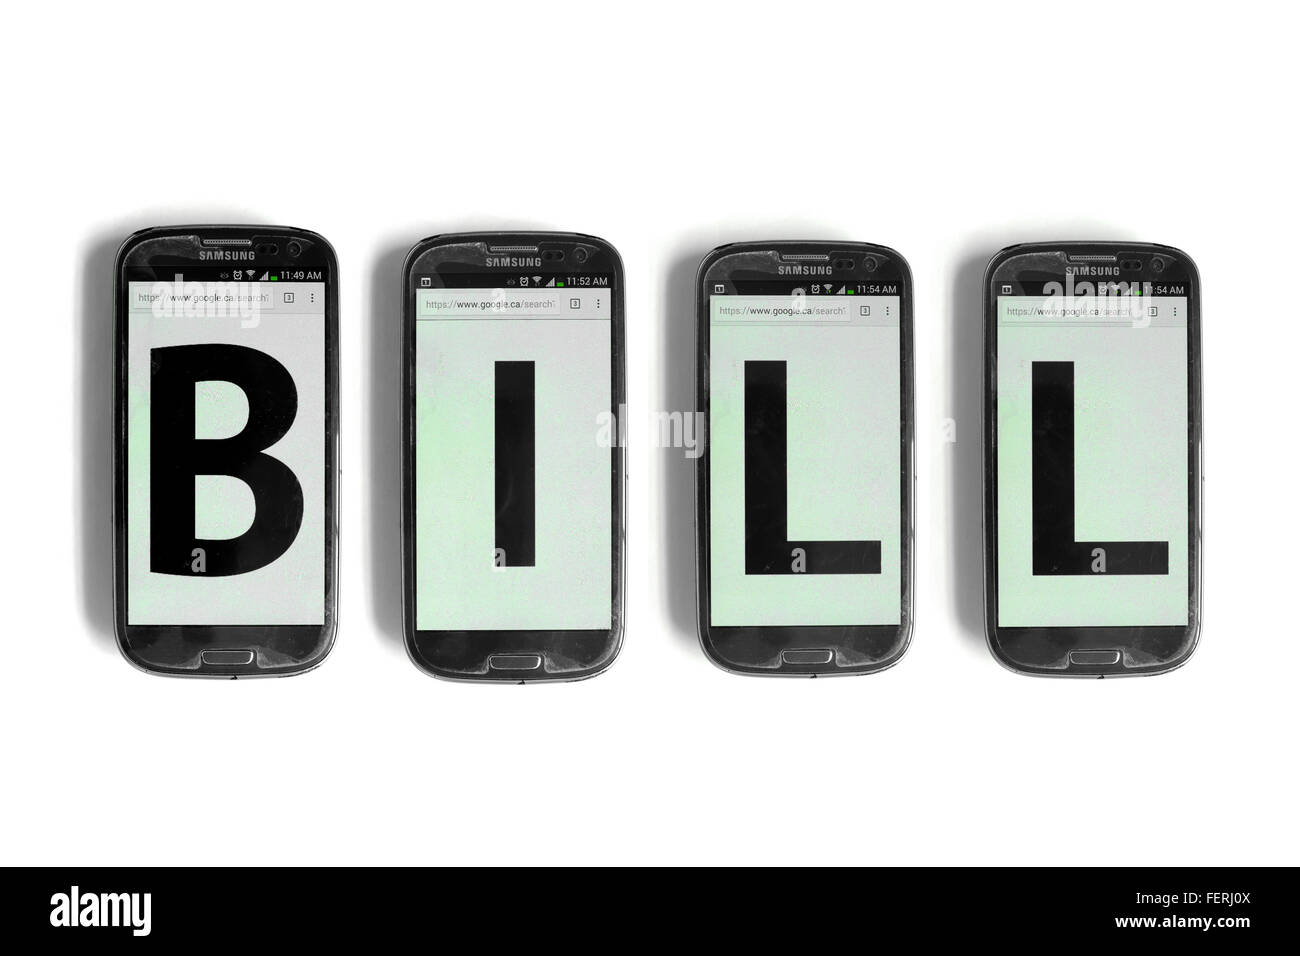 Bill on the screens of smartphones photographed against a white background. Stock Photo